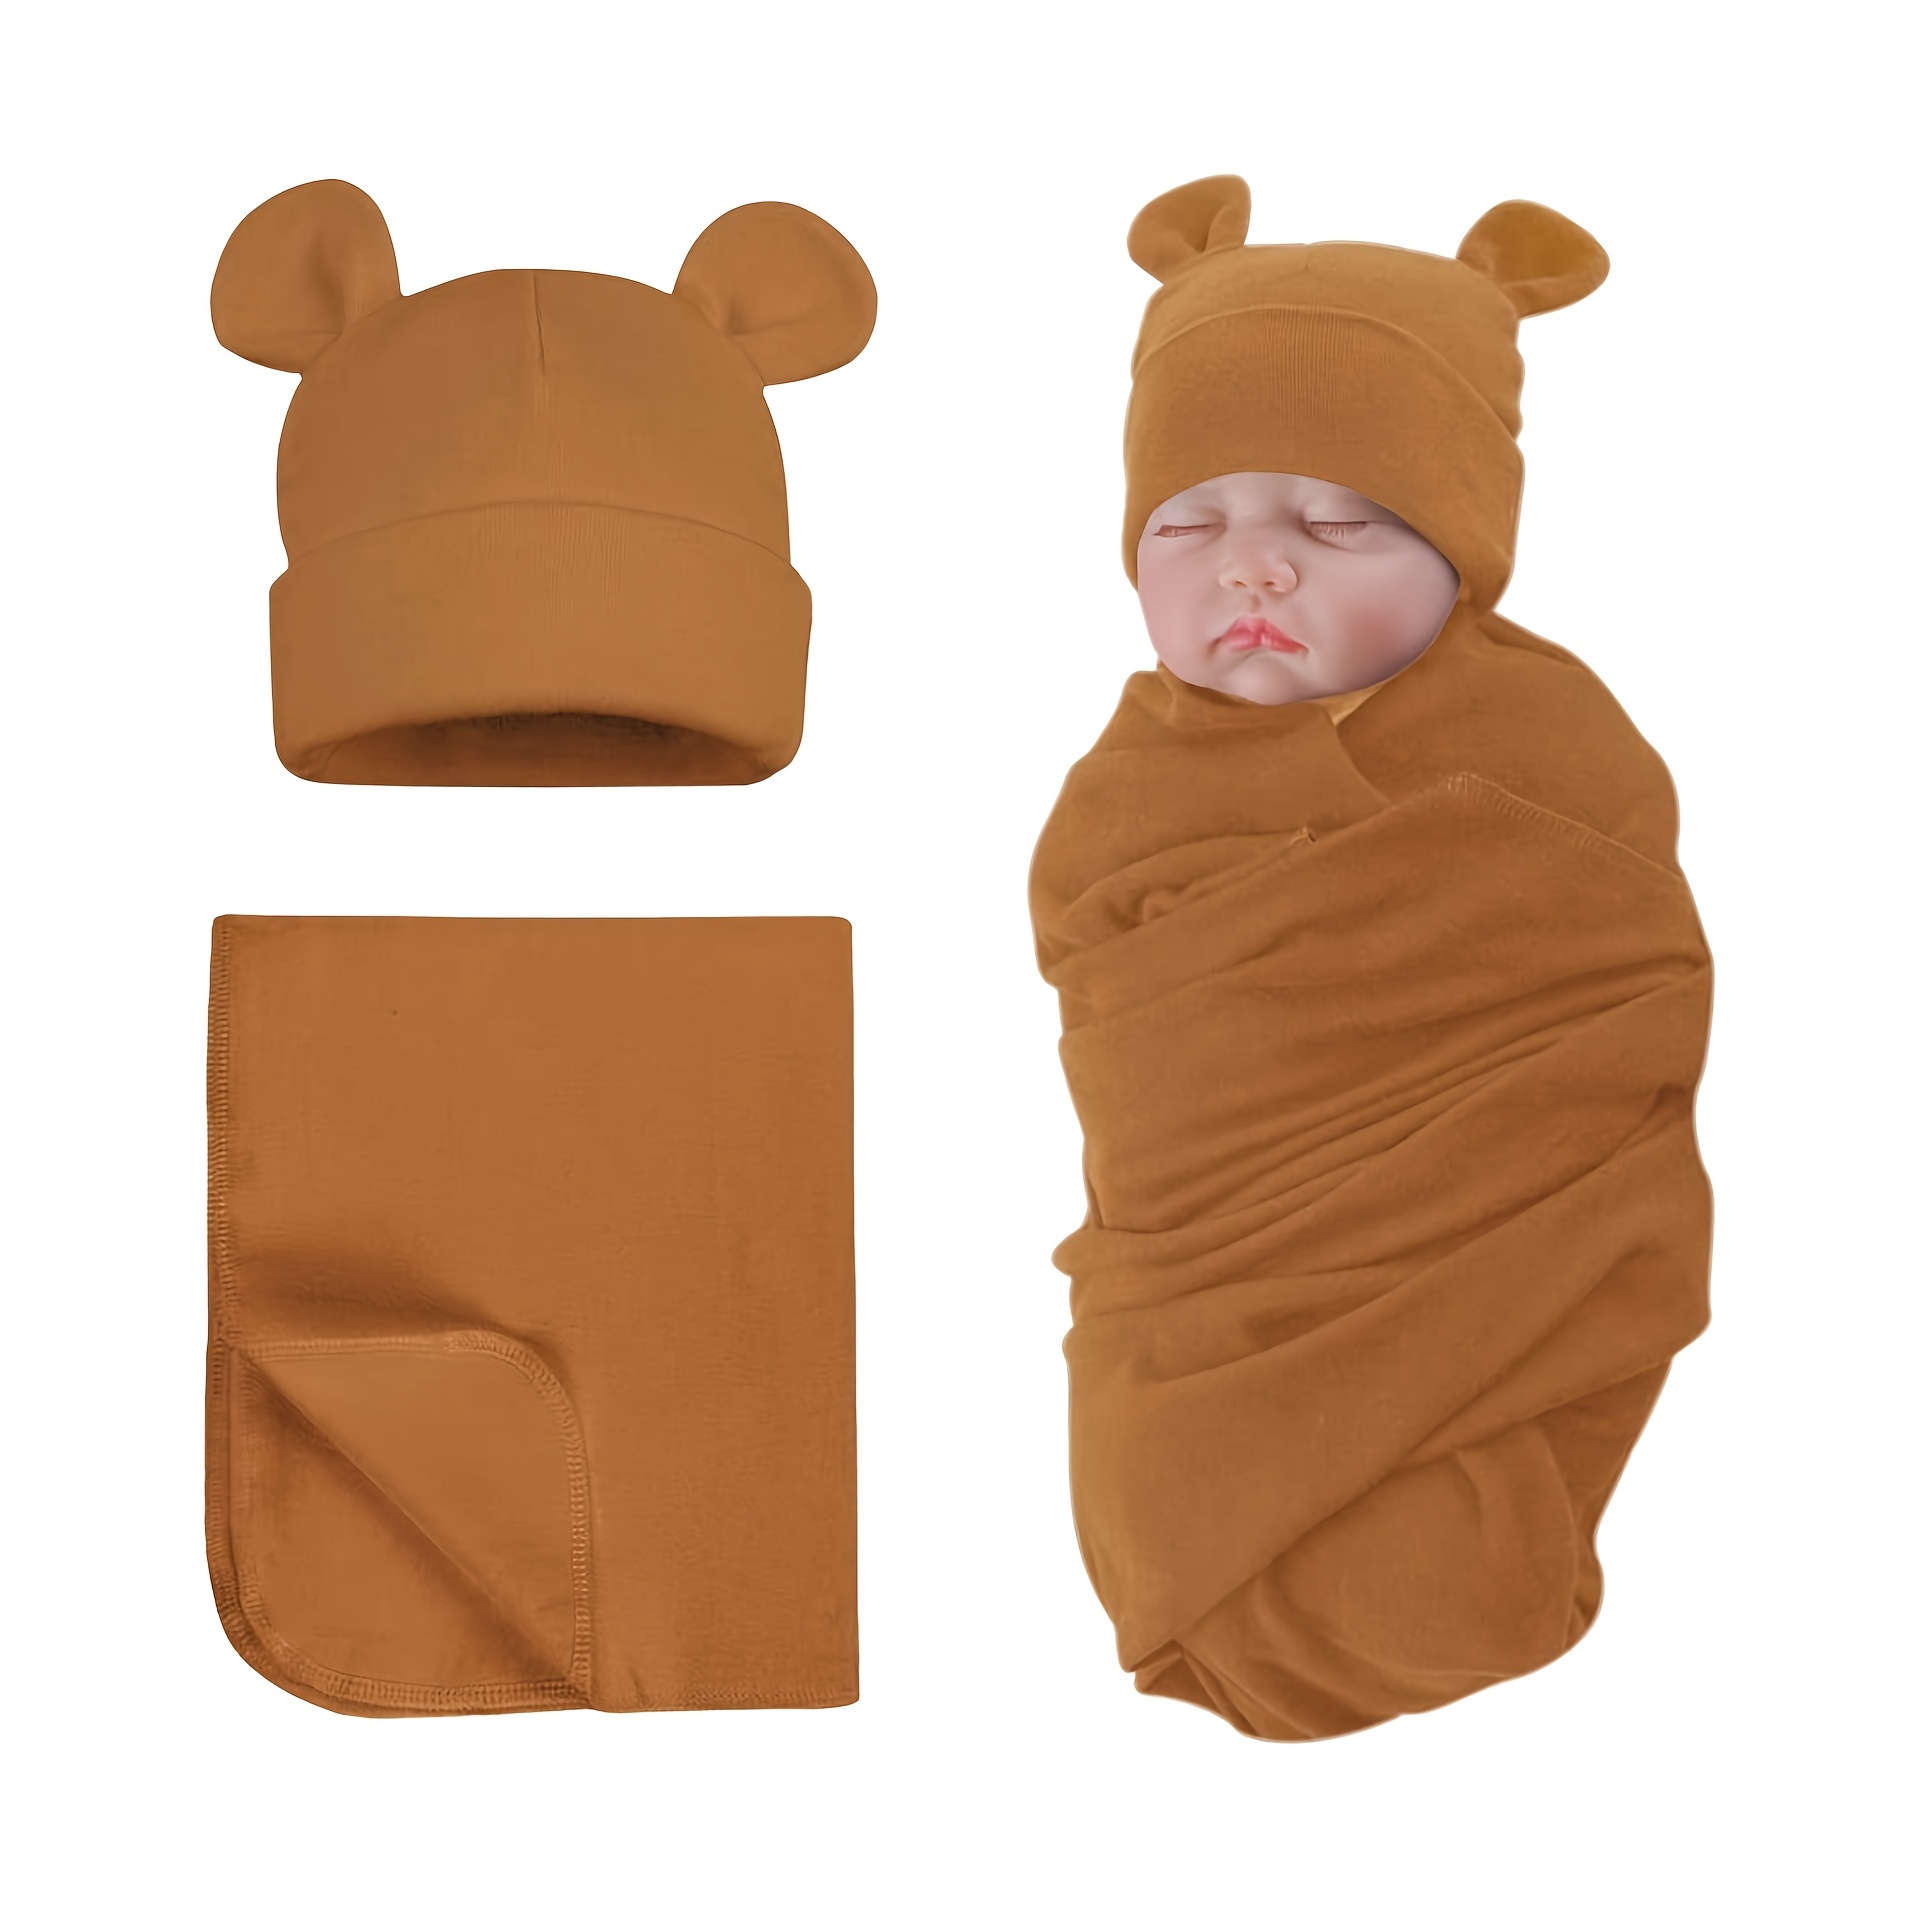 Cheap Baby Swaddle Set with Cap & Headband | Shop Our Store